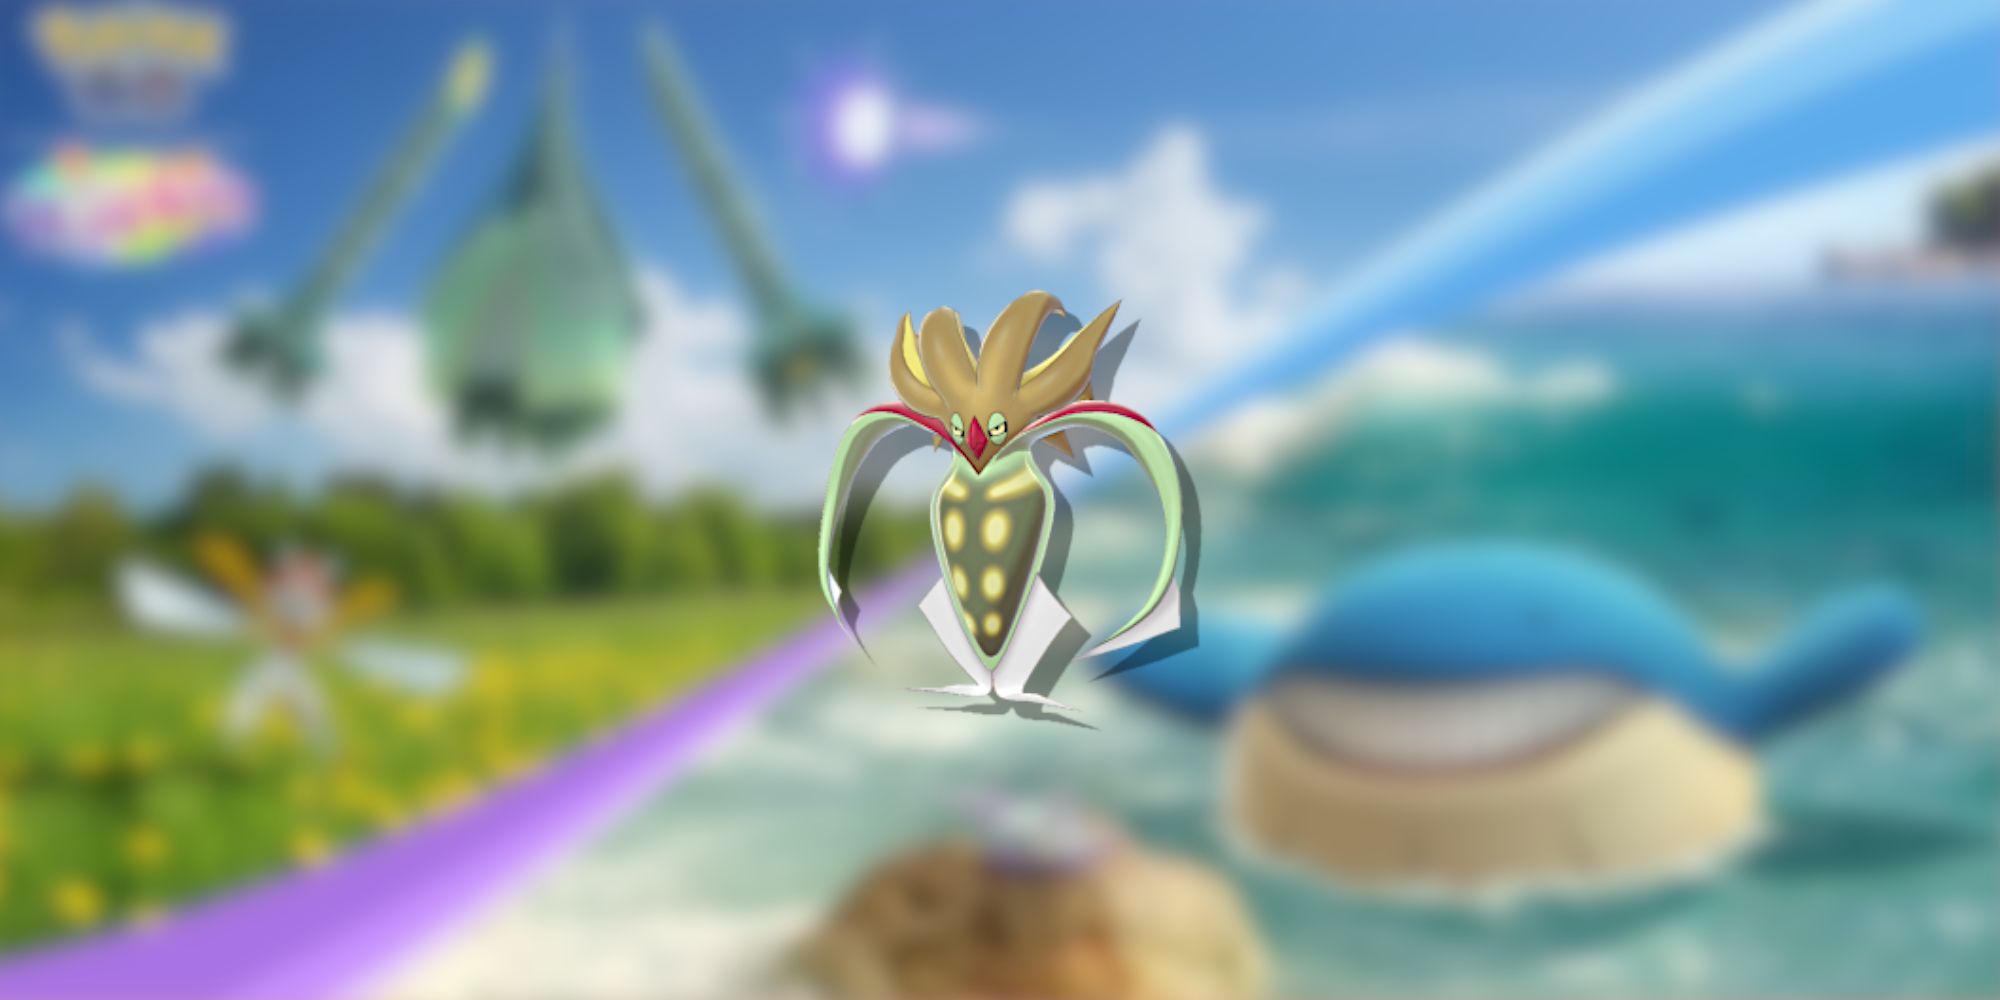 Image of the Pokemon Malamar in the foreground and the World of Wonders event in the backgound from Pokemon GO